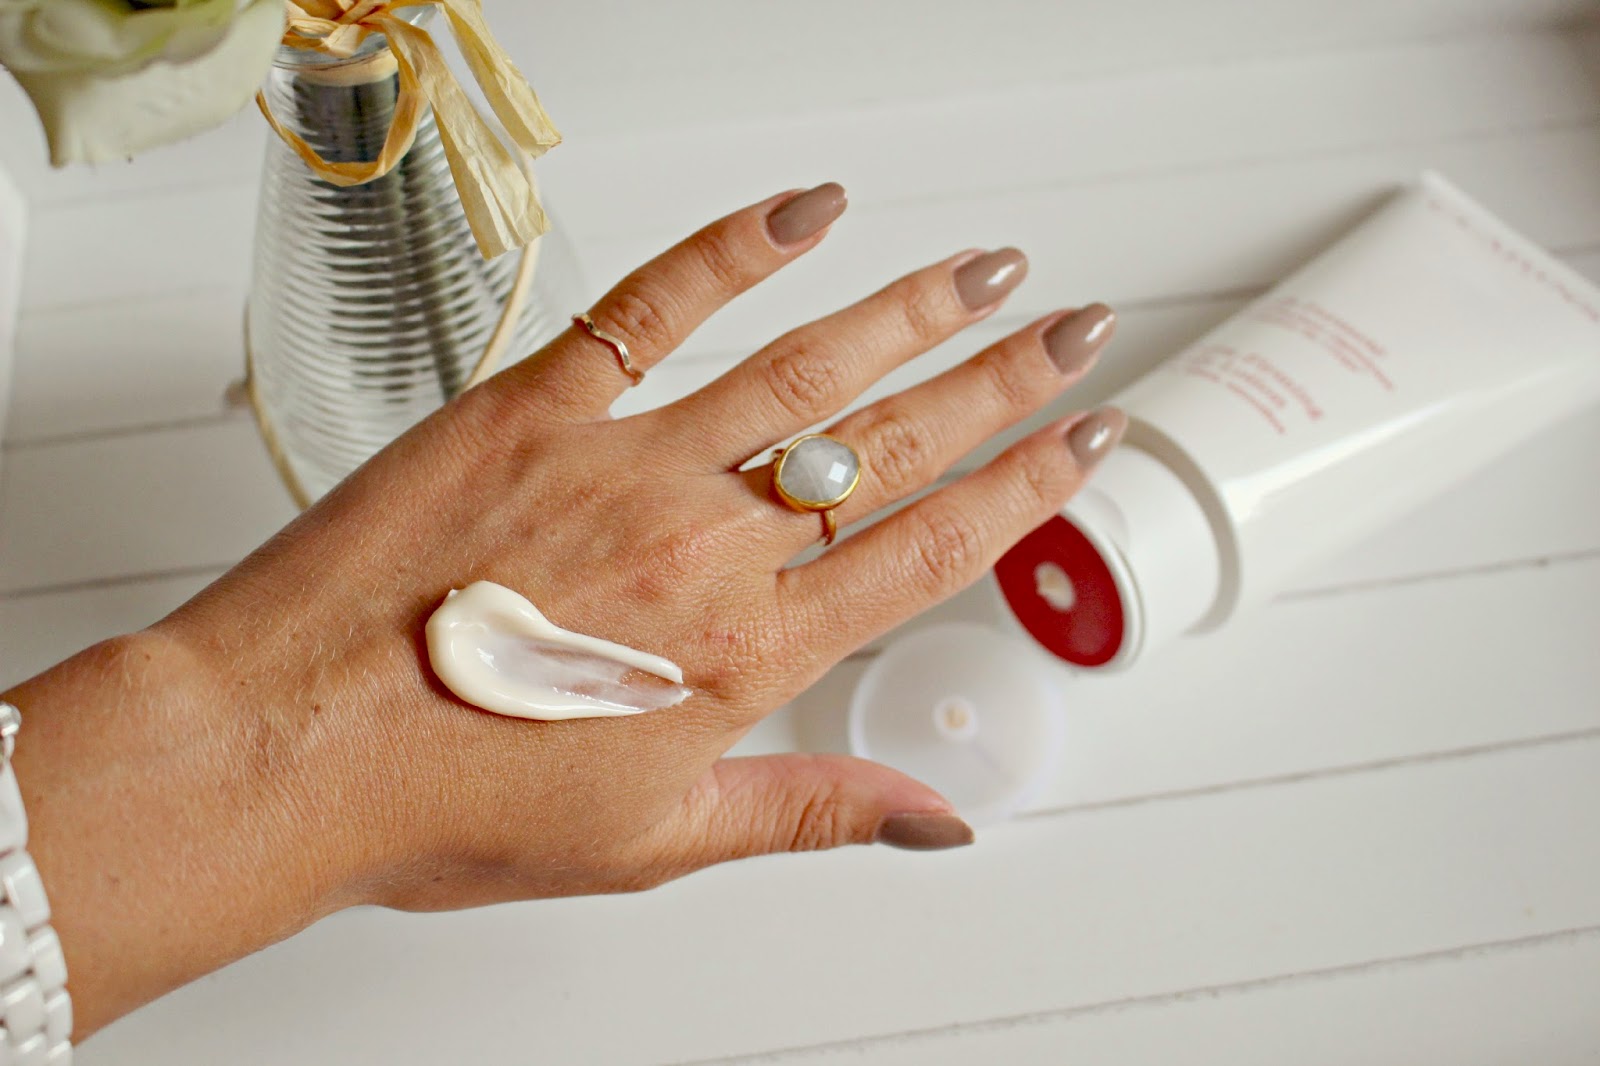 Bust and Body firming Clarins! - Mumblr